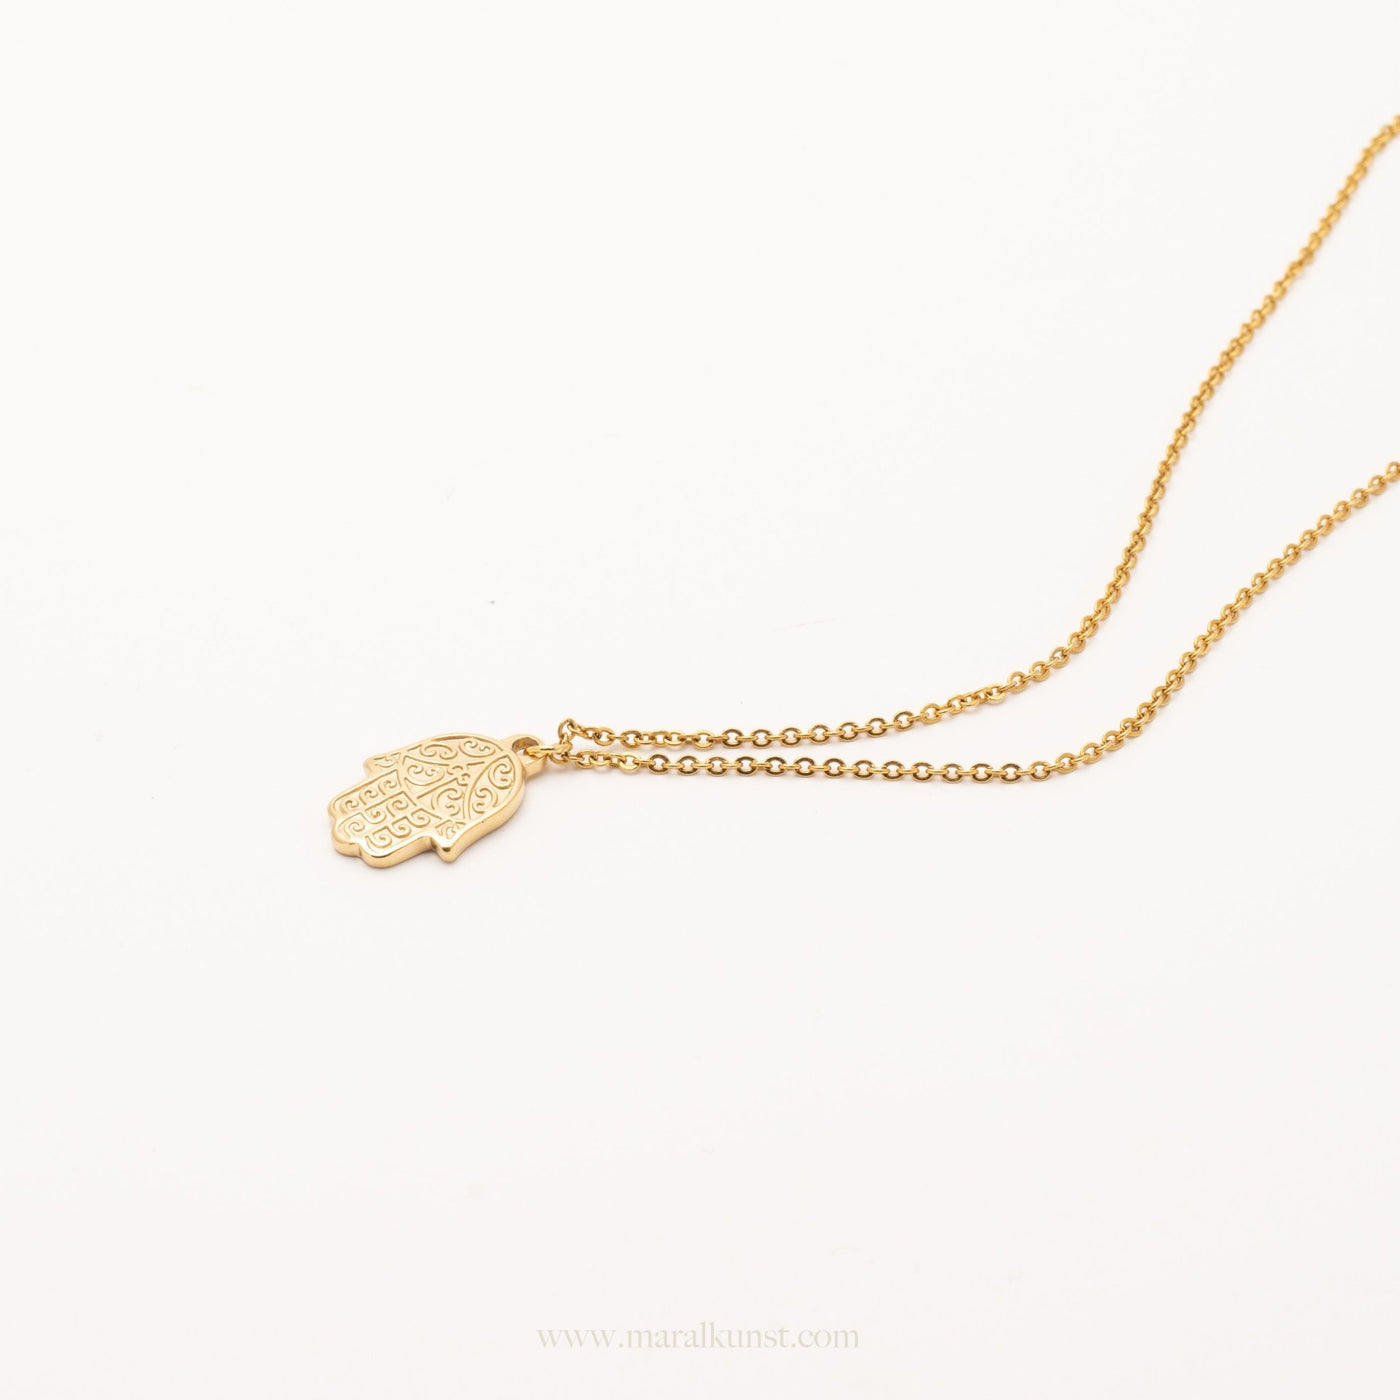 Hand of Fatima Gold Necklace - Maral Kunst Jewelry